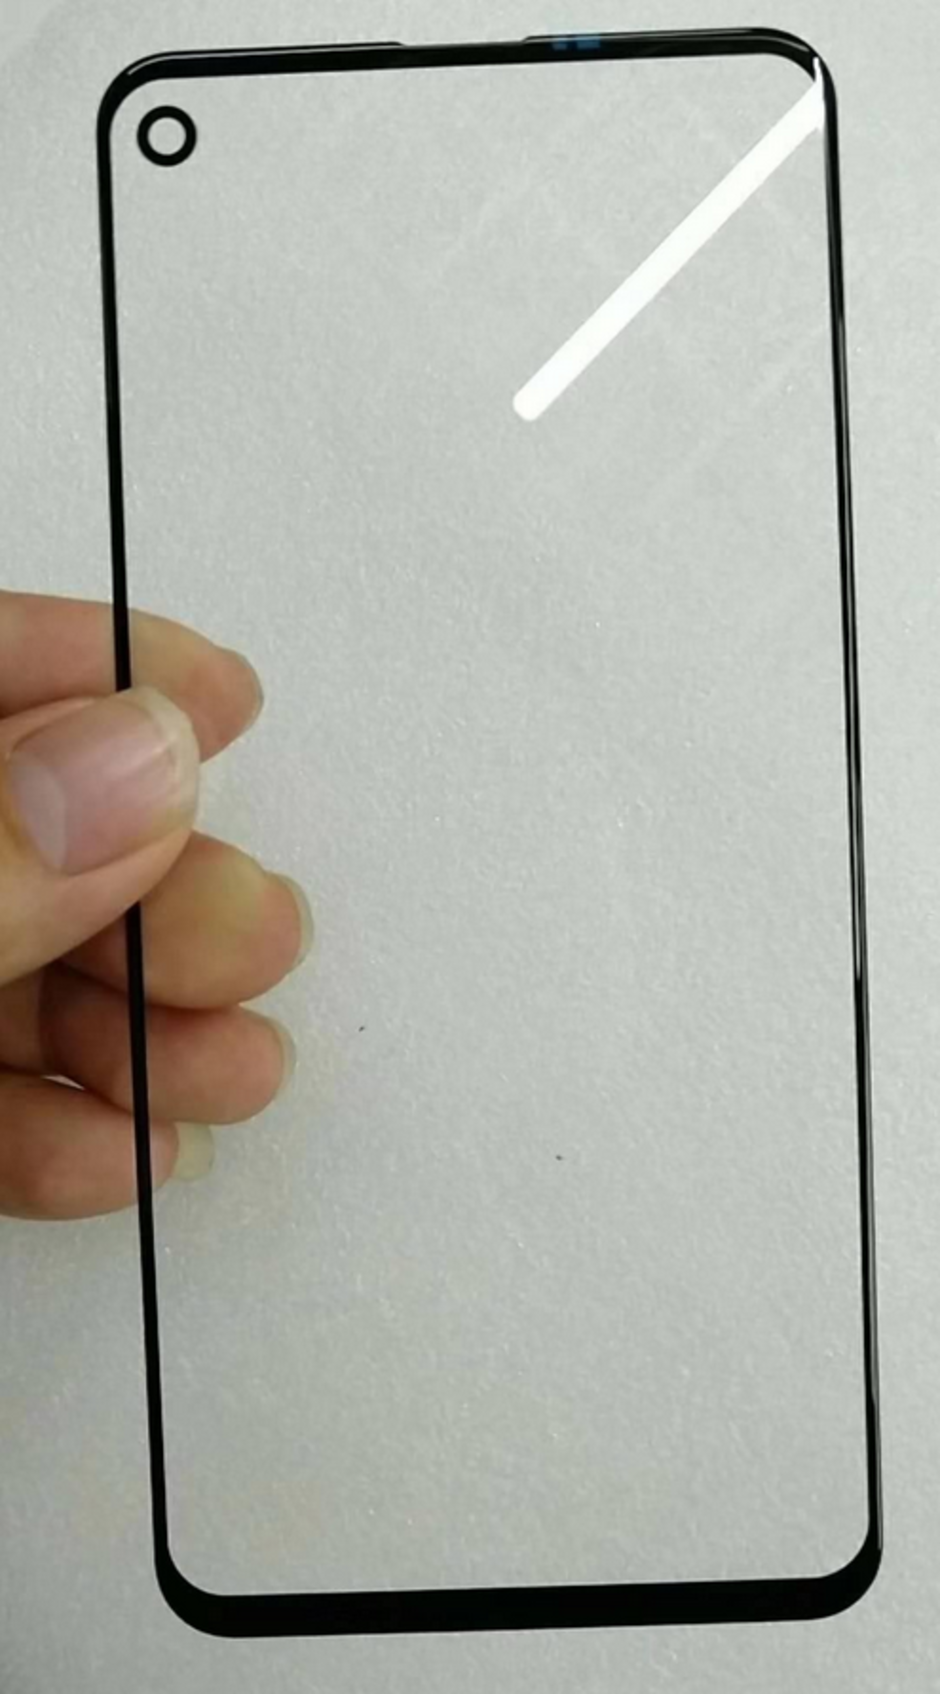 Alleged screen protector for the Samsung Galaxy A8s with a cutout for the in-screen camera - In-screen camera cutout seen on screen protector allegedly made for Samsung Galaxy A8s